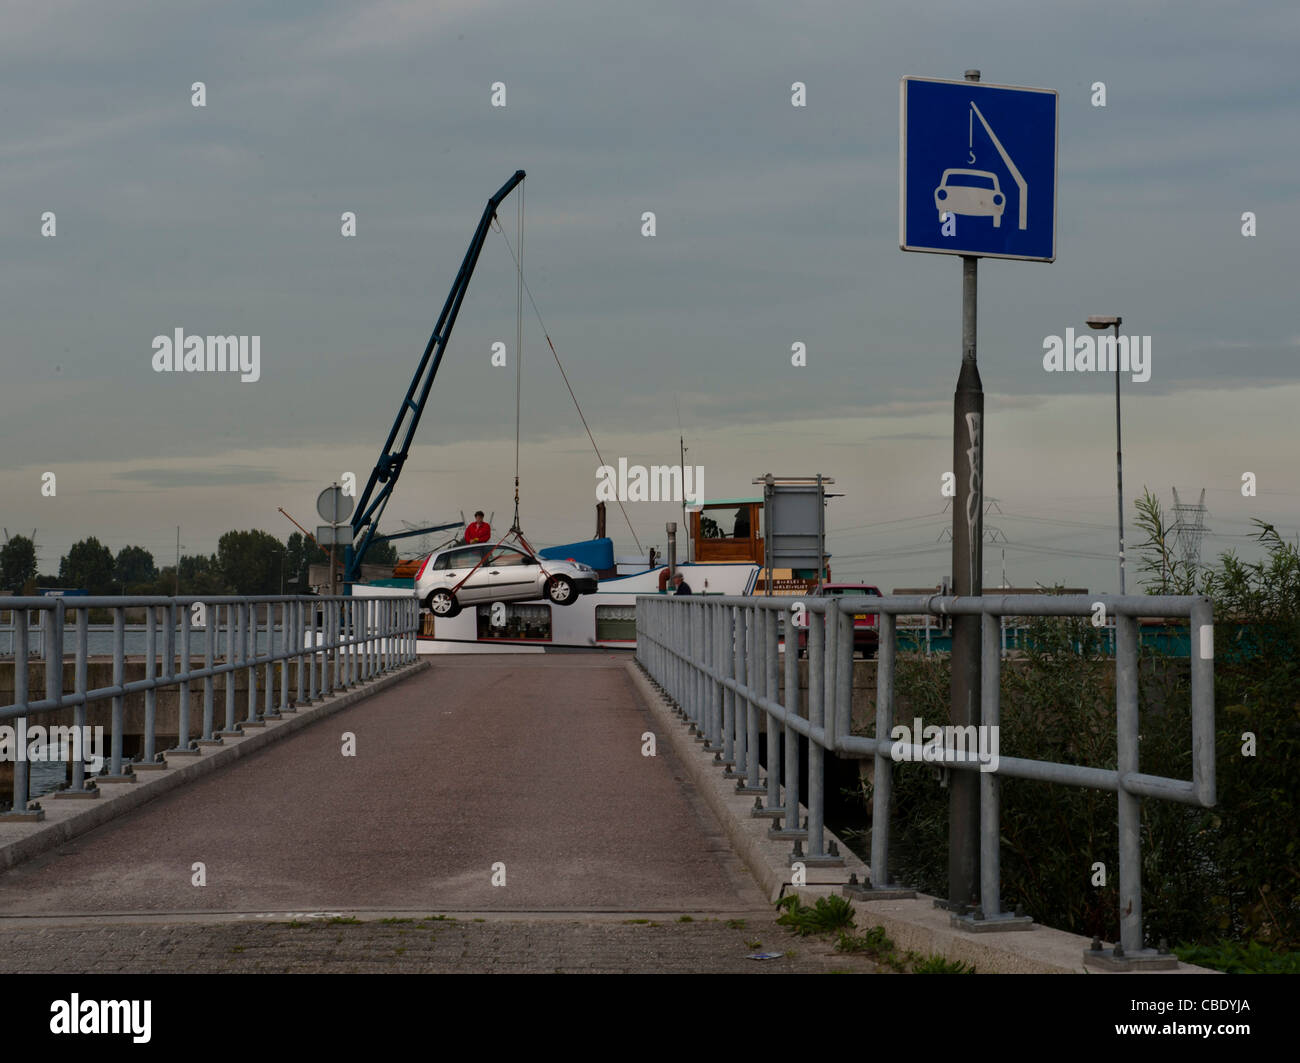 place to tow a car from a vessel sigh traffic sign, humor, visual rhyming, amusing coincidence, crane Stock Photo